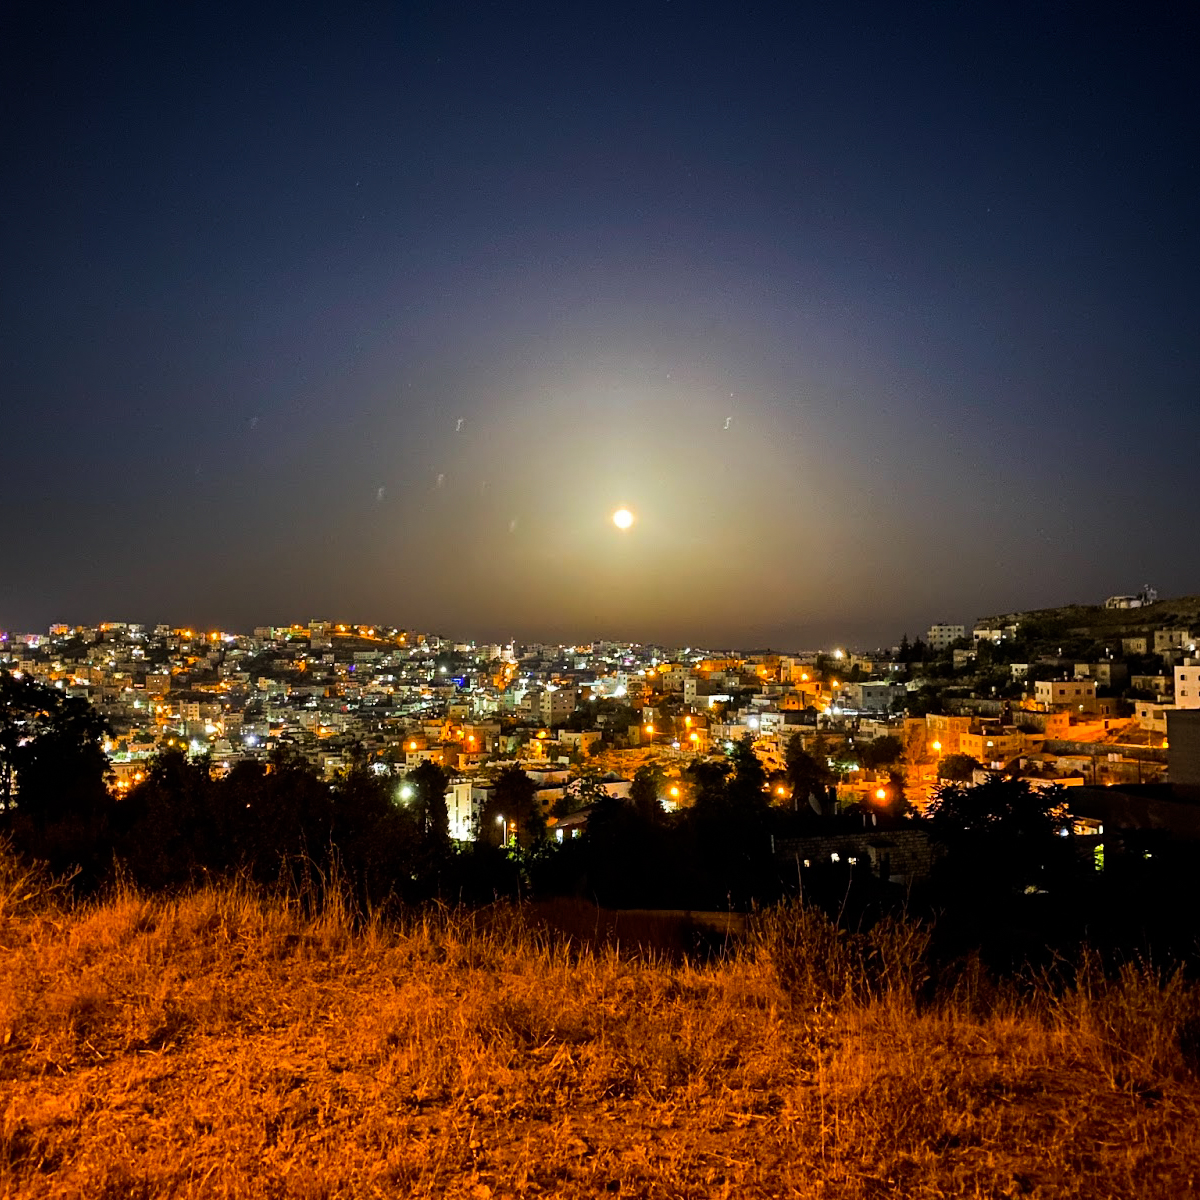 The moon over the old city of Hebron, view from Tel-Rumeida